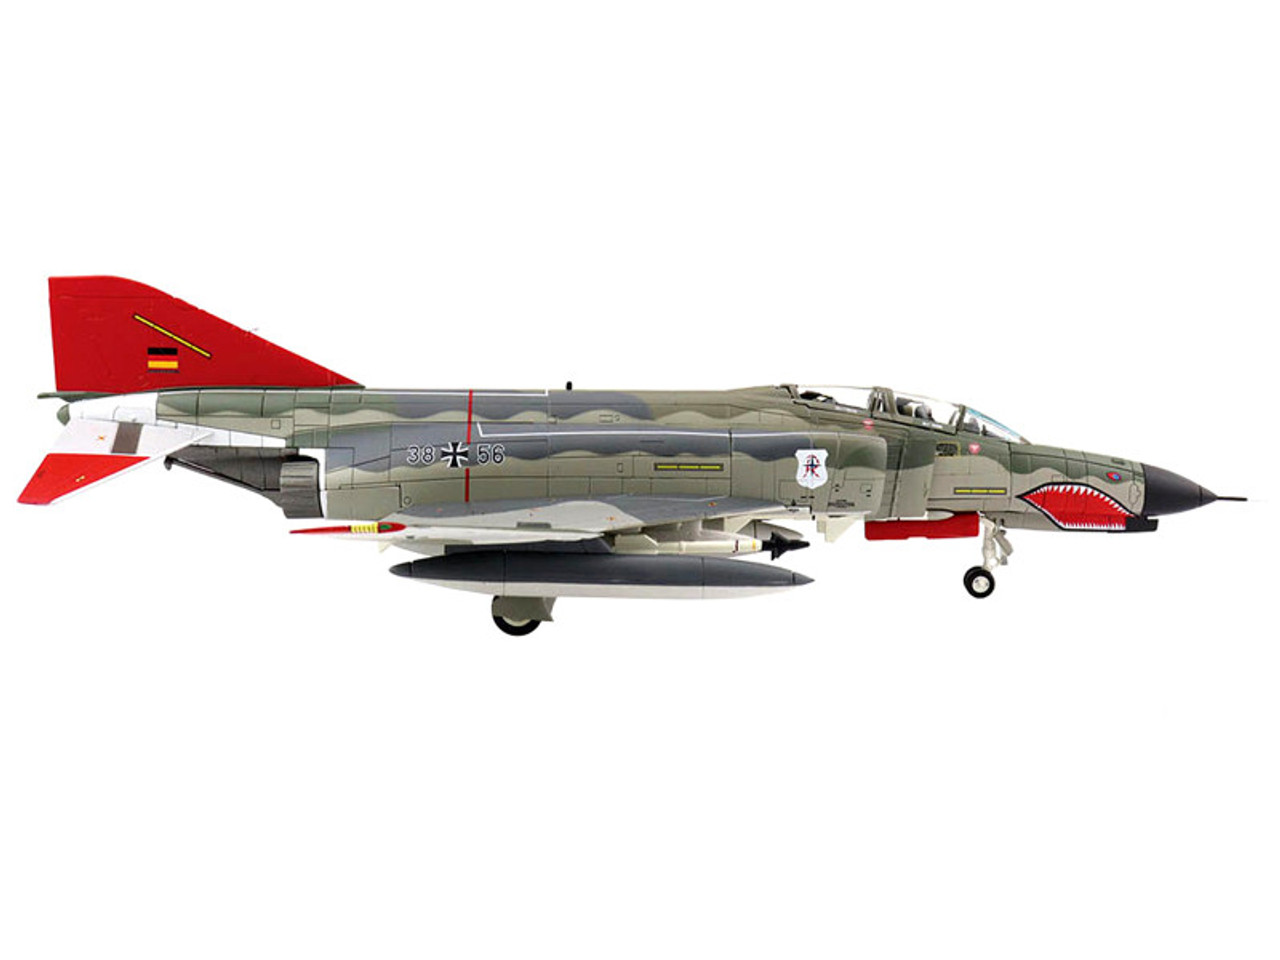 McDonnell Douglas F-4F Phantom II "Norm 81" Fighter Aircraft "JG 71 "Richthofen" GAFTIC 86 CFB Goose Bay Canada" (May 1986) "Air Power Series" 1/72 Diecast Model by Hobby Master